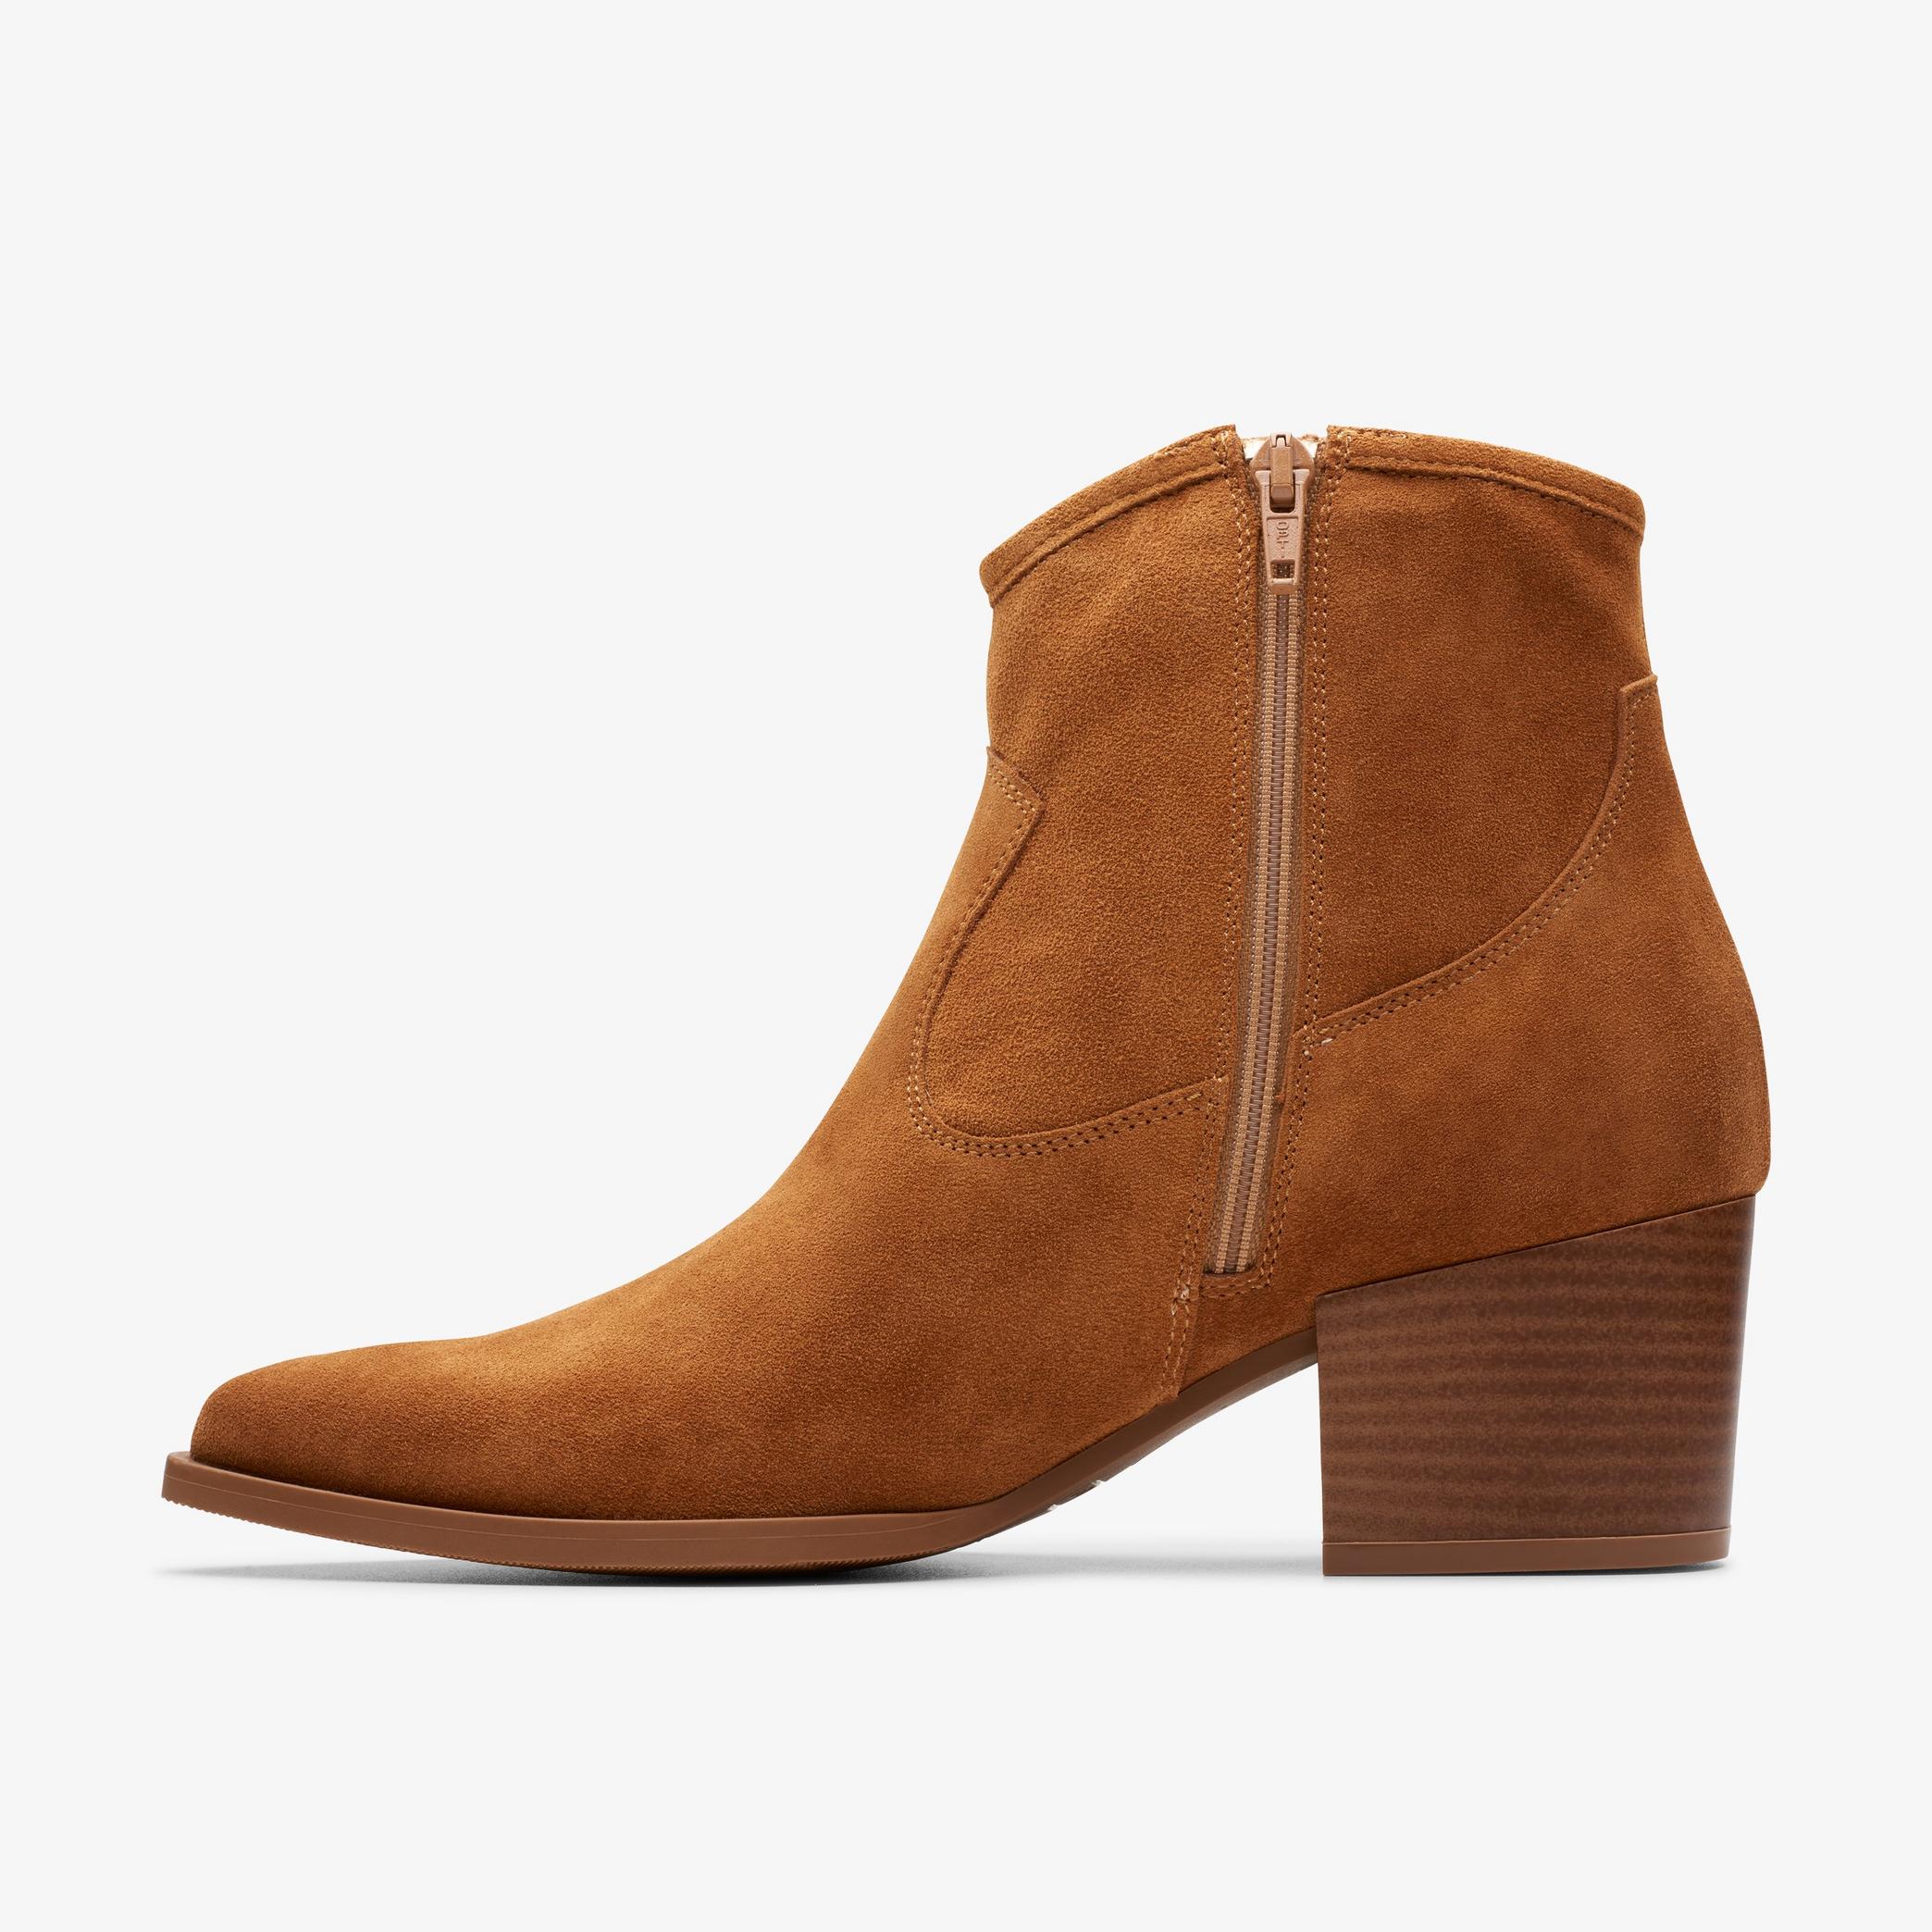 Elder Rae Tan Suede Ankle Boots, view 3 of 7